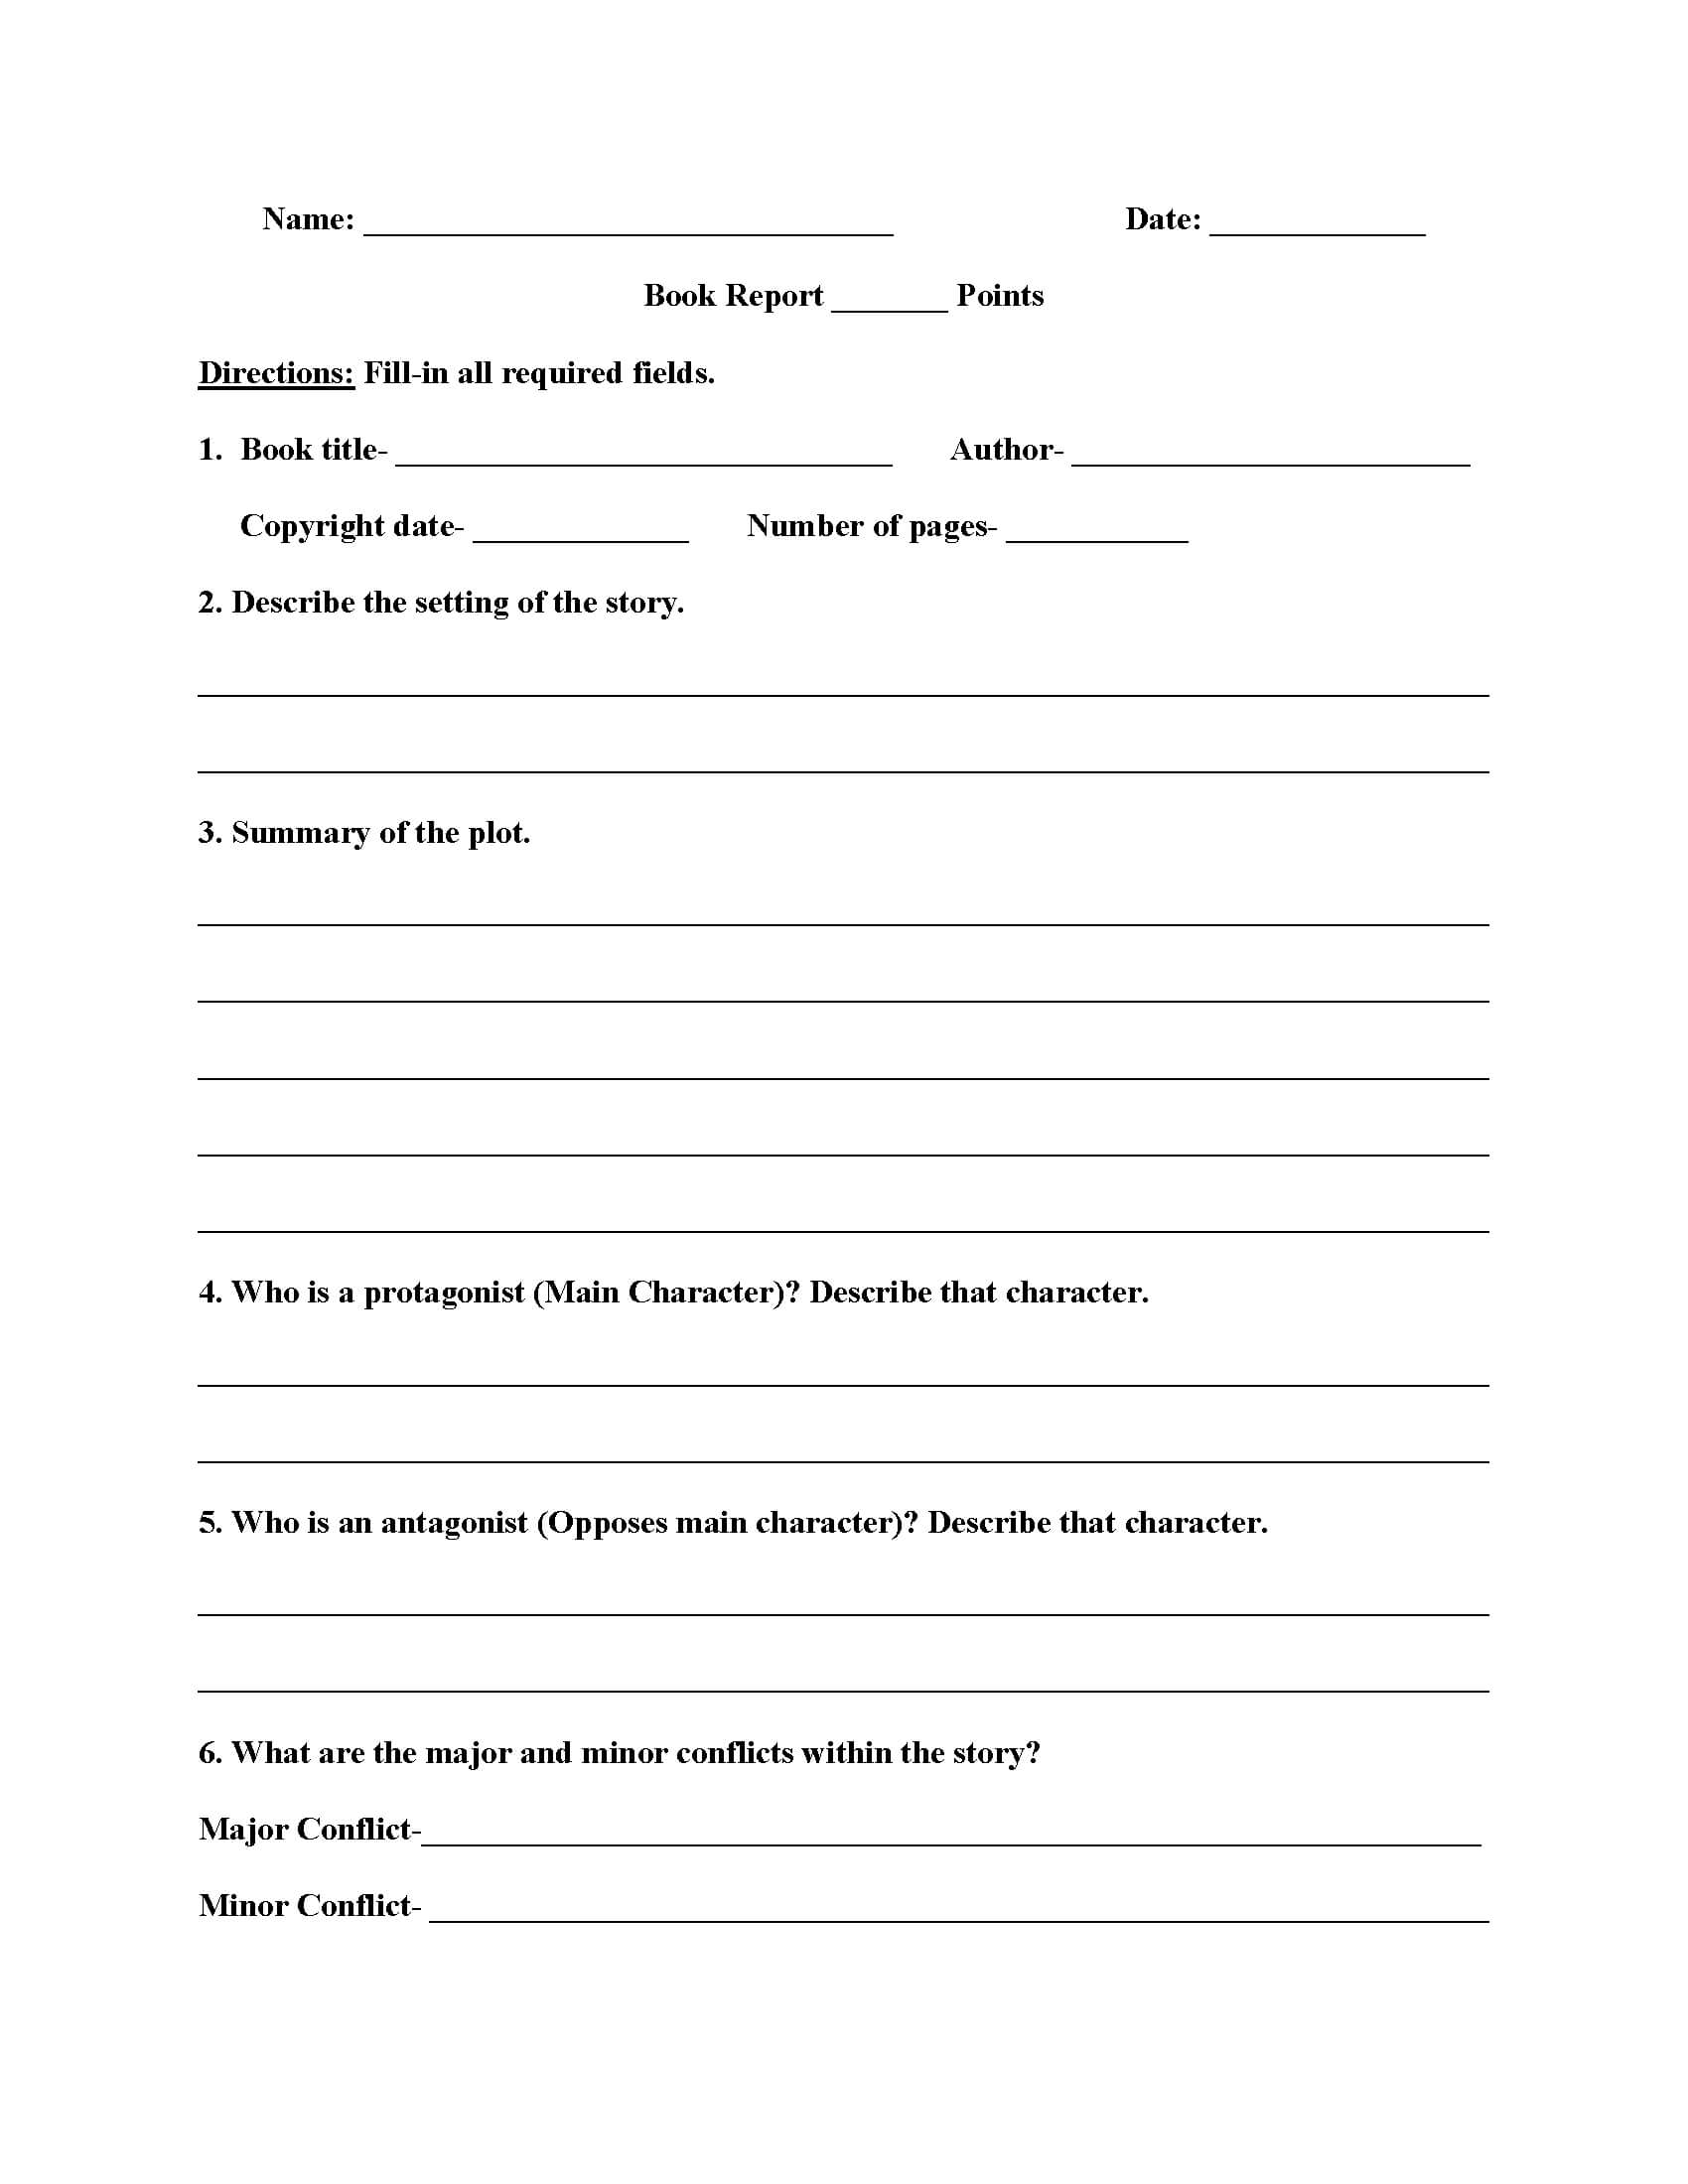 Englishlinx | Book Report Worksheets Pertaining To Book Report Template 4Th Grade